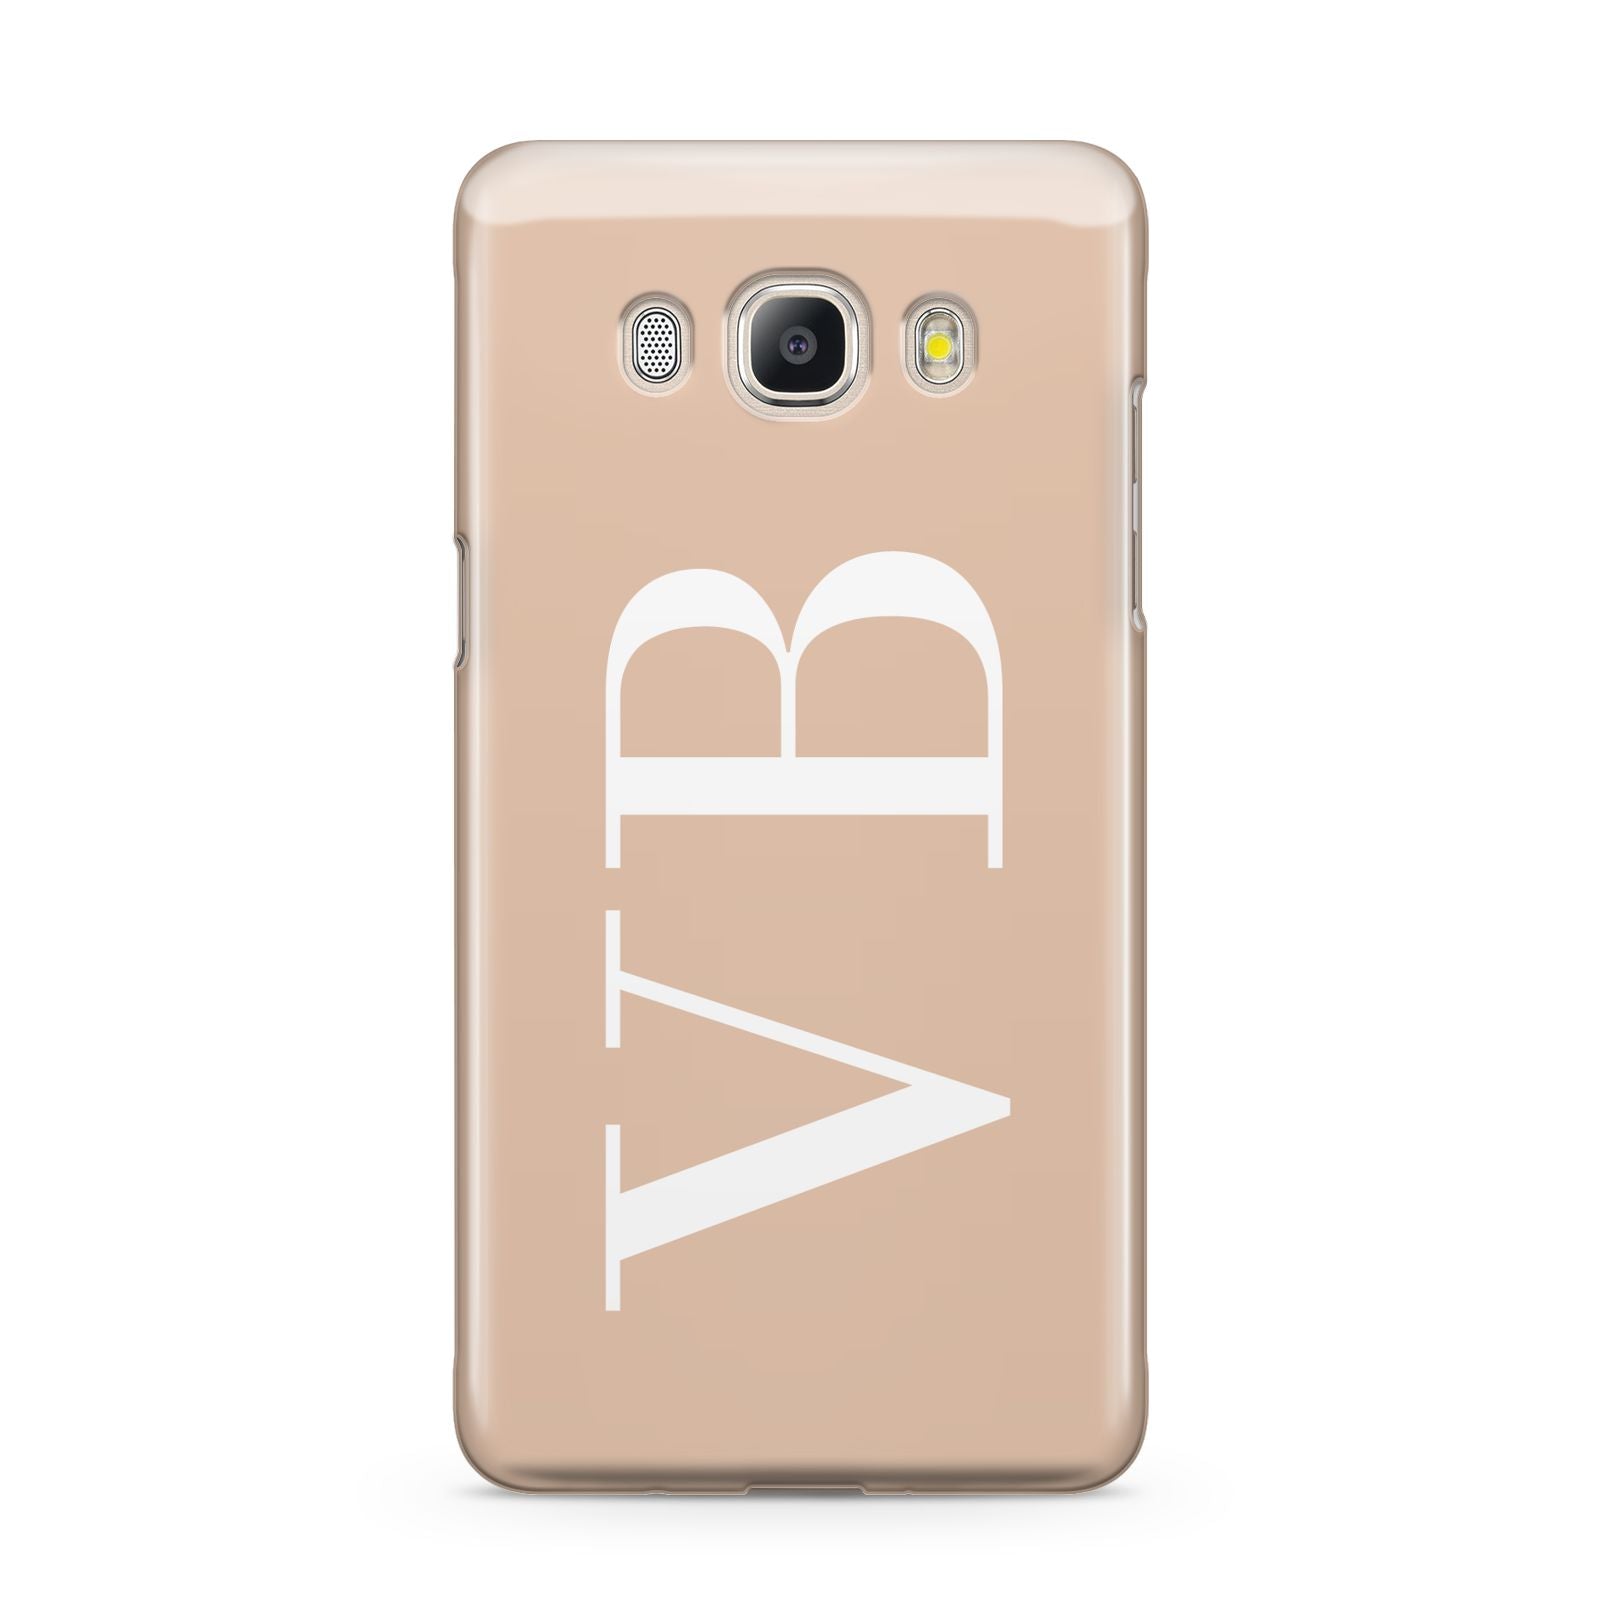 Nude And White Personalised Samsung Galaxy J5 2016 Case